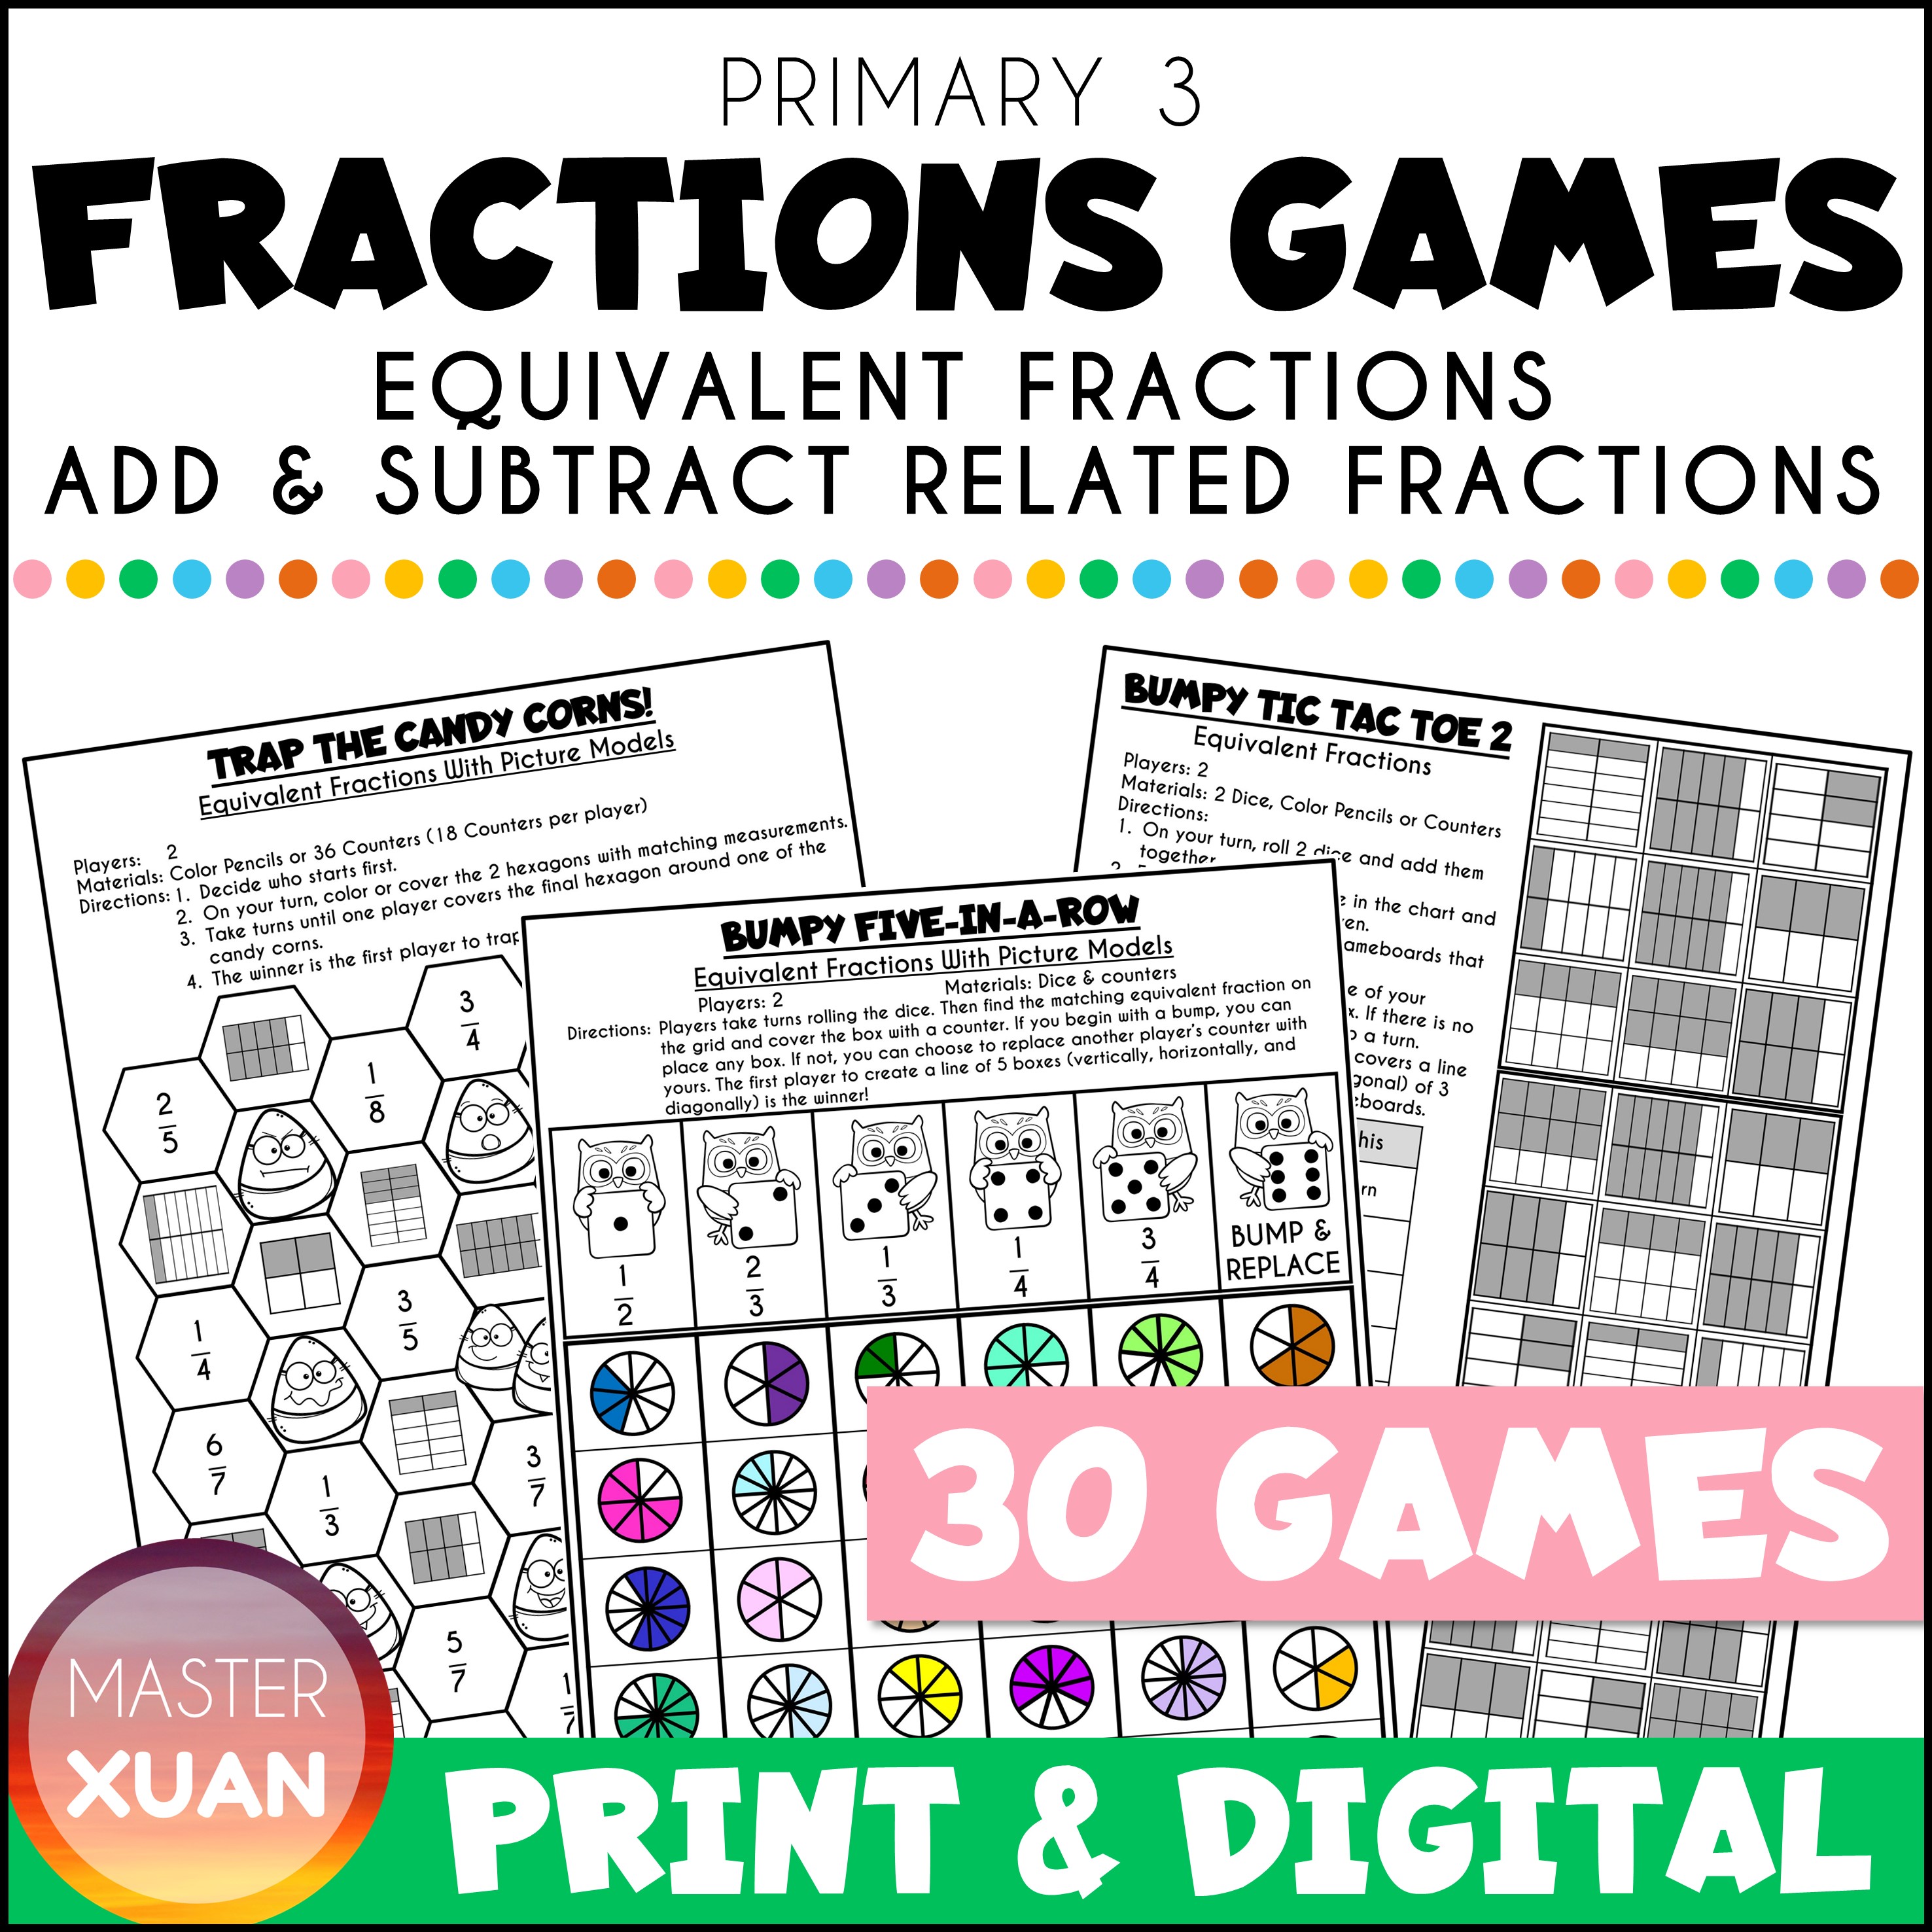 30 fractions games maths lesson should have.